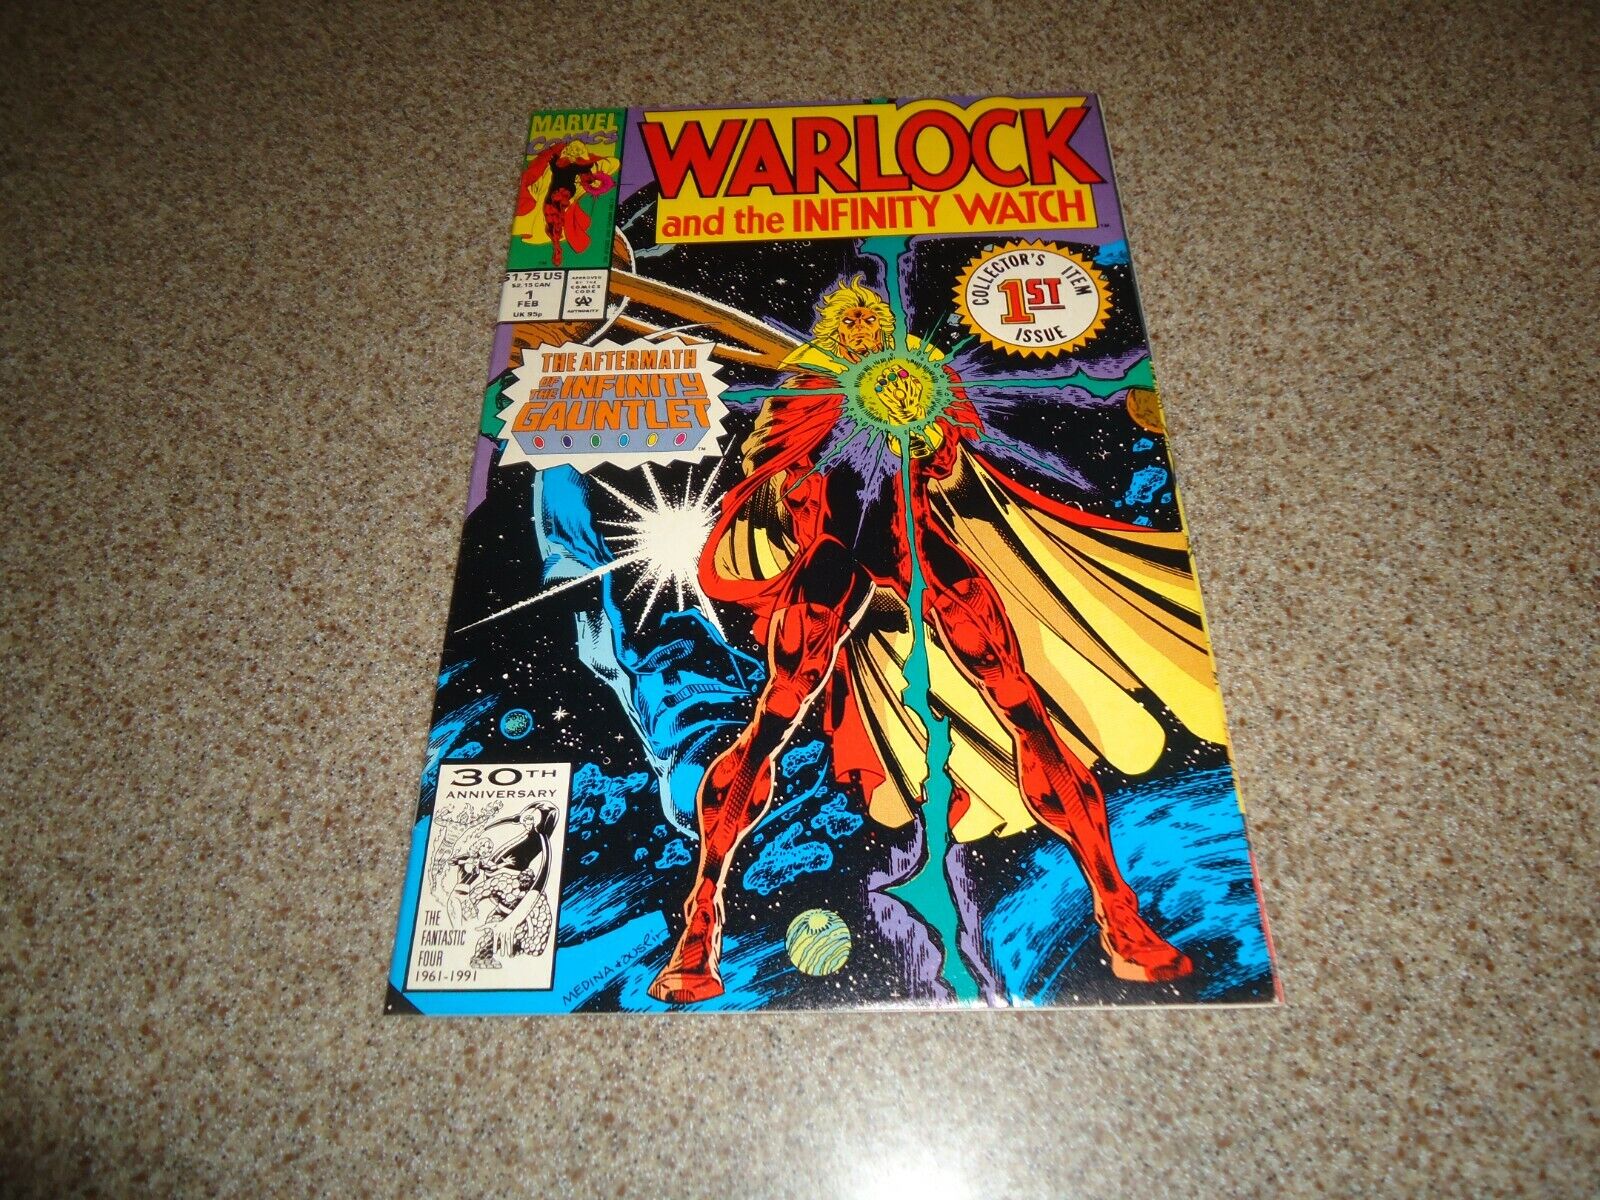 WARLOCK AND THE INFINITY WATCH #1